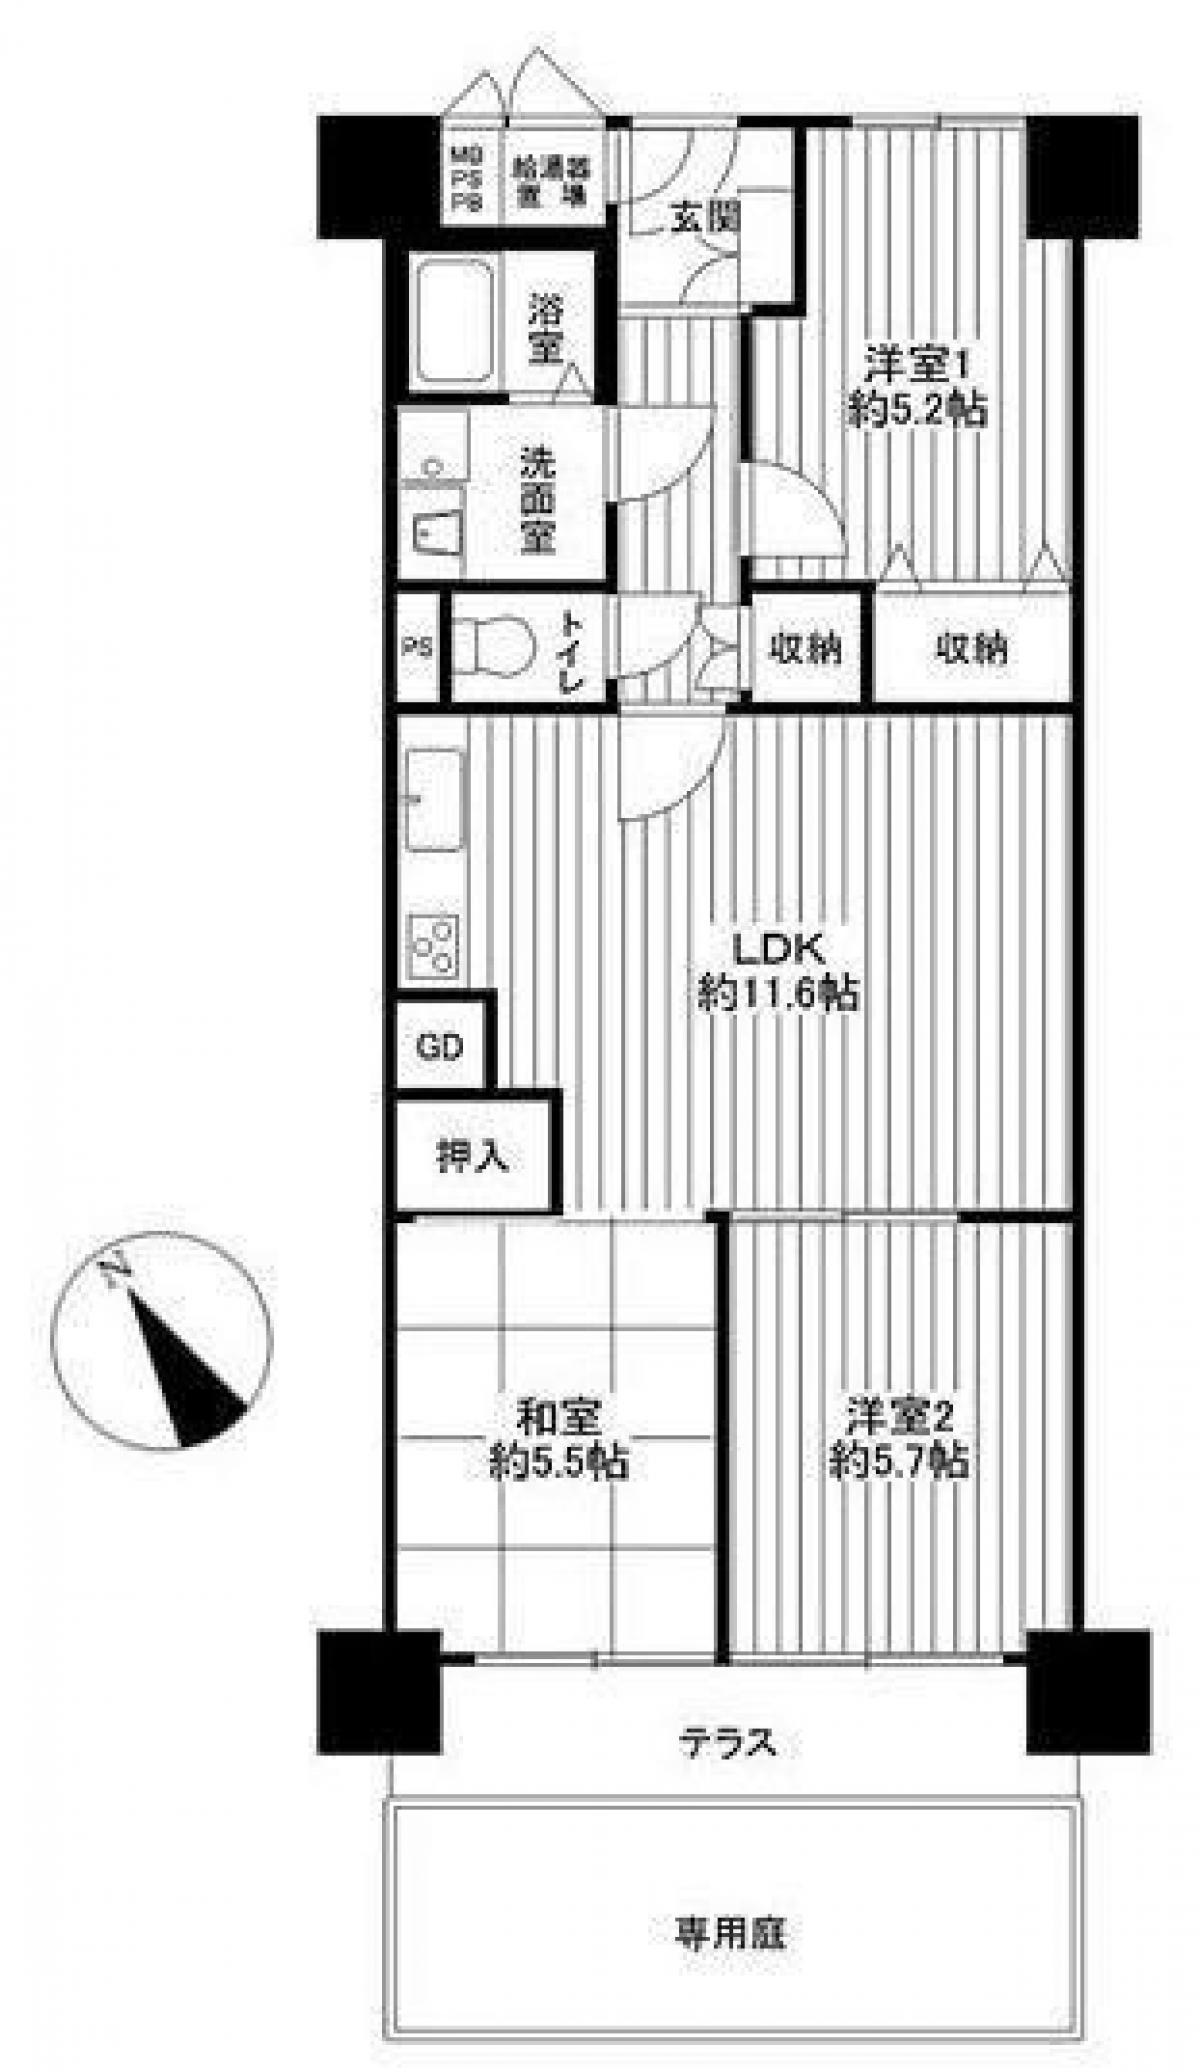 Picture of Apartment For Sale in Kyoto Shi Minami Ku, Kyoto, Japan